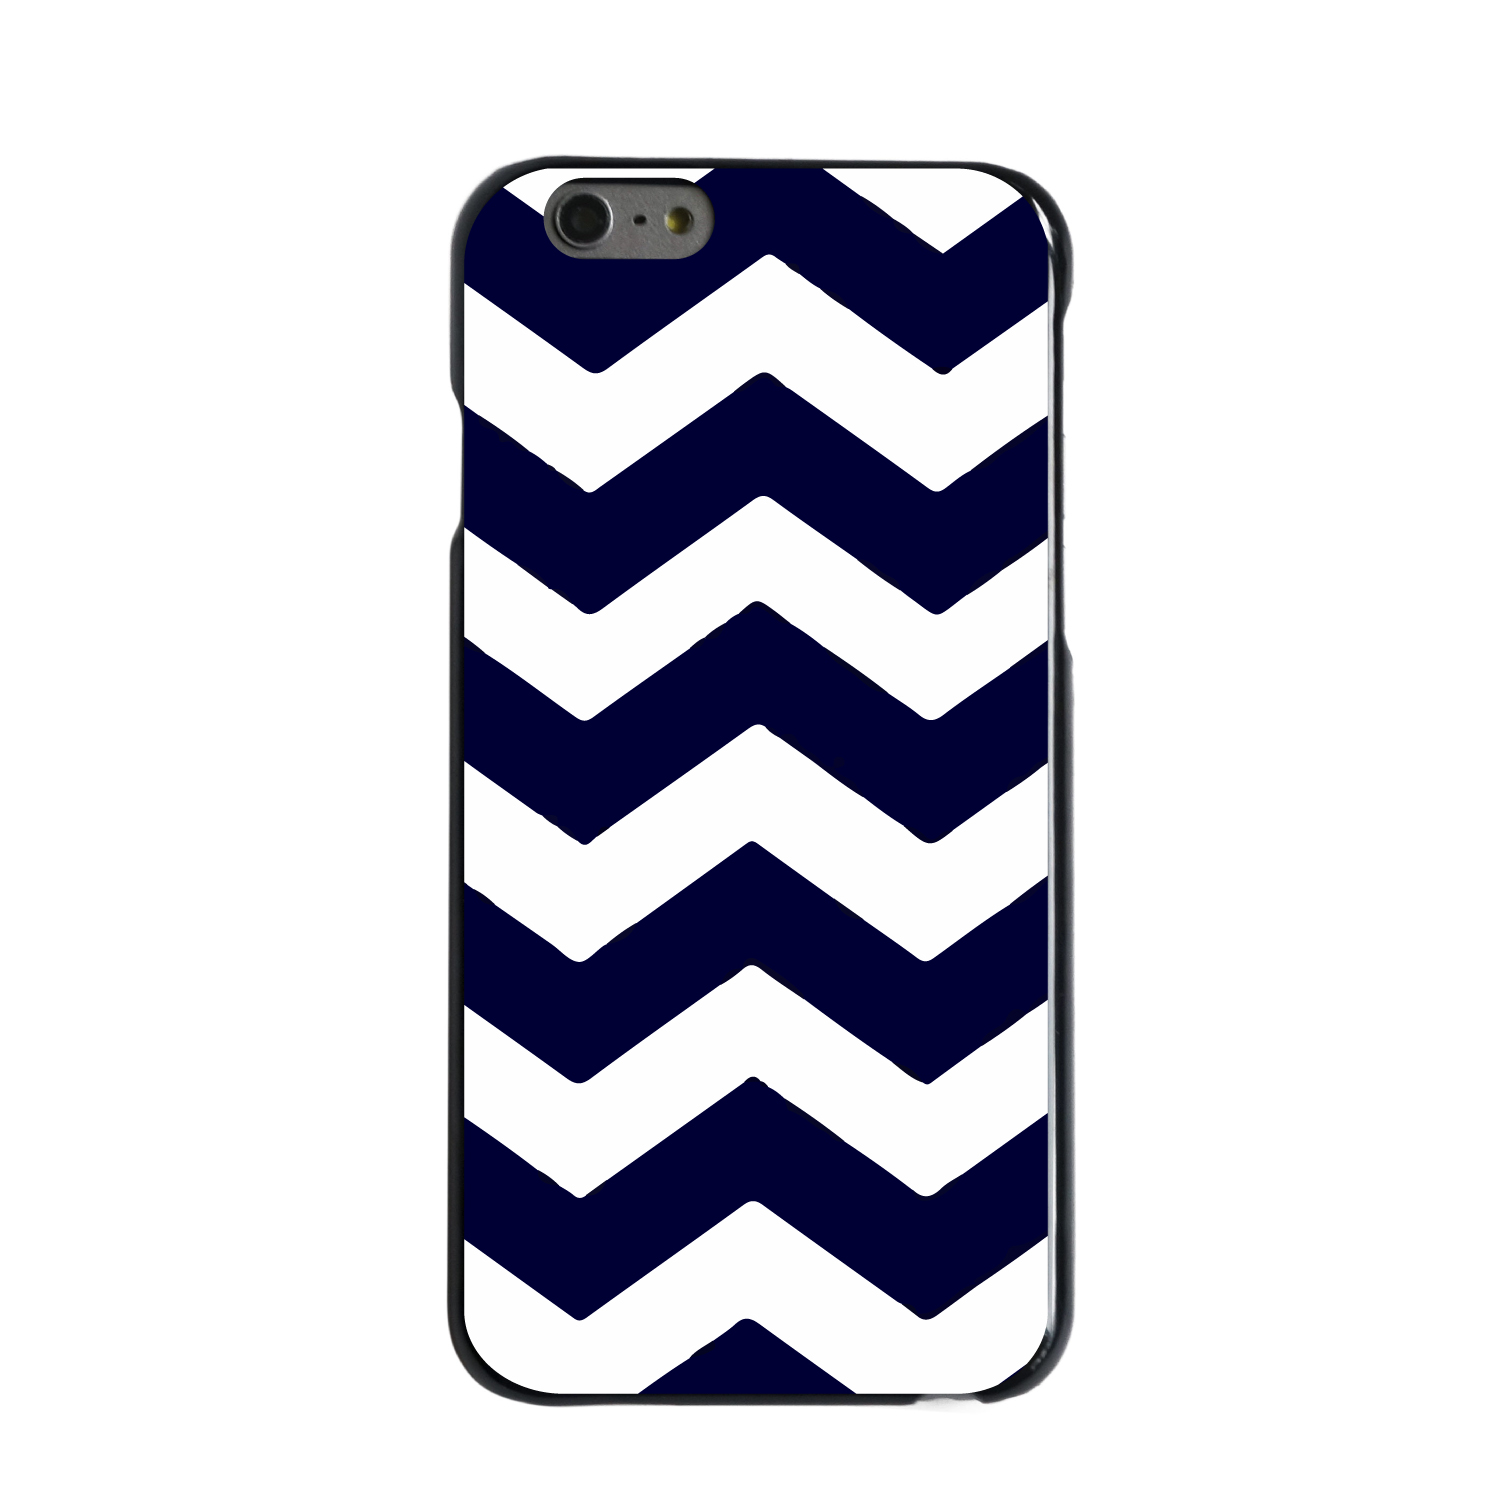 All that Chevron HARD Protector Case Snap On Phone Cover Accessory 